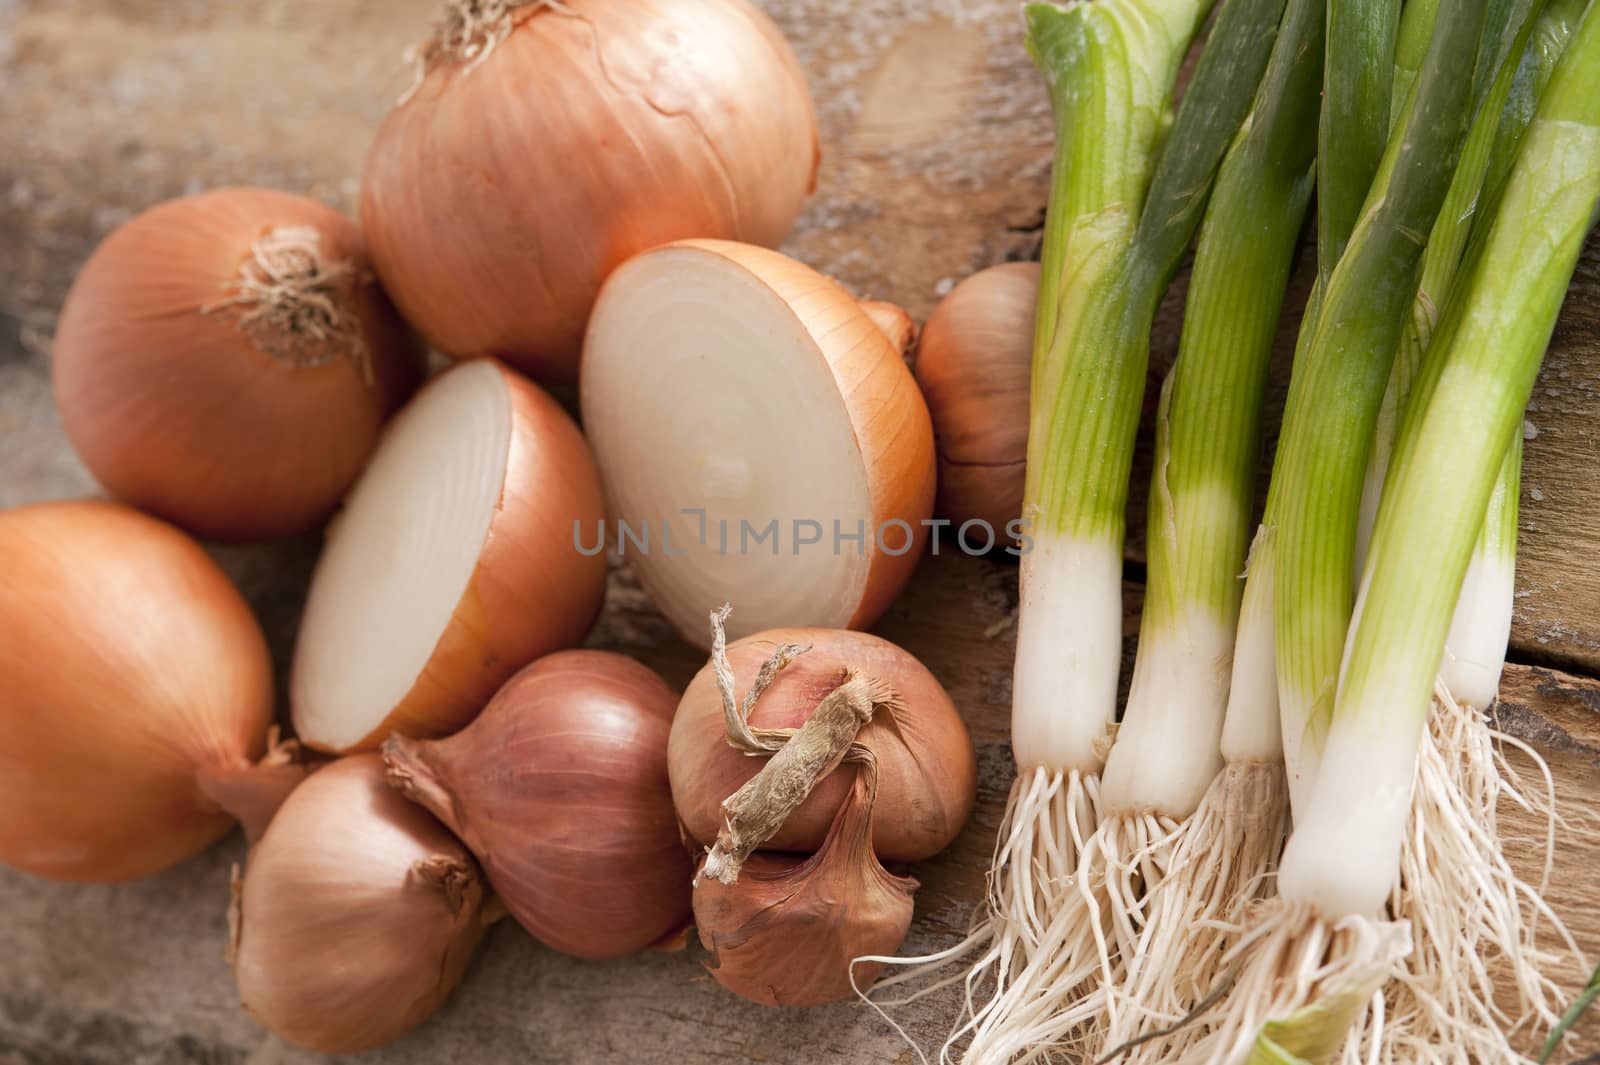 Fresh whole and halved brown onions with a bunch of young scallions to be used as a pungent flavoring in cooking or salads, close up overhead background view